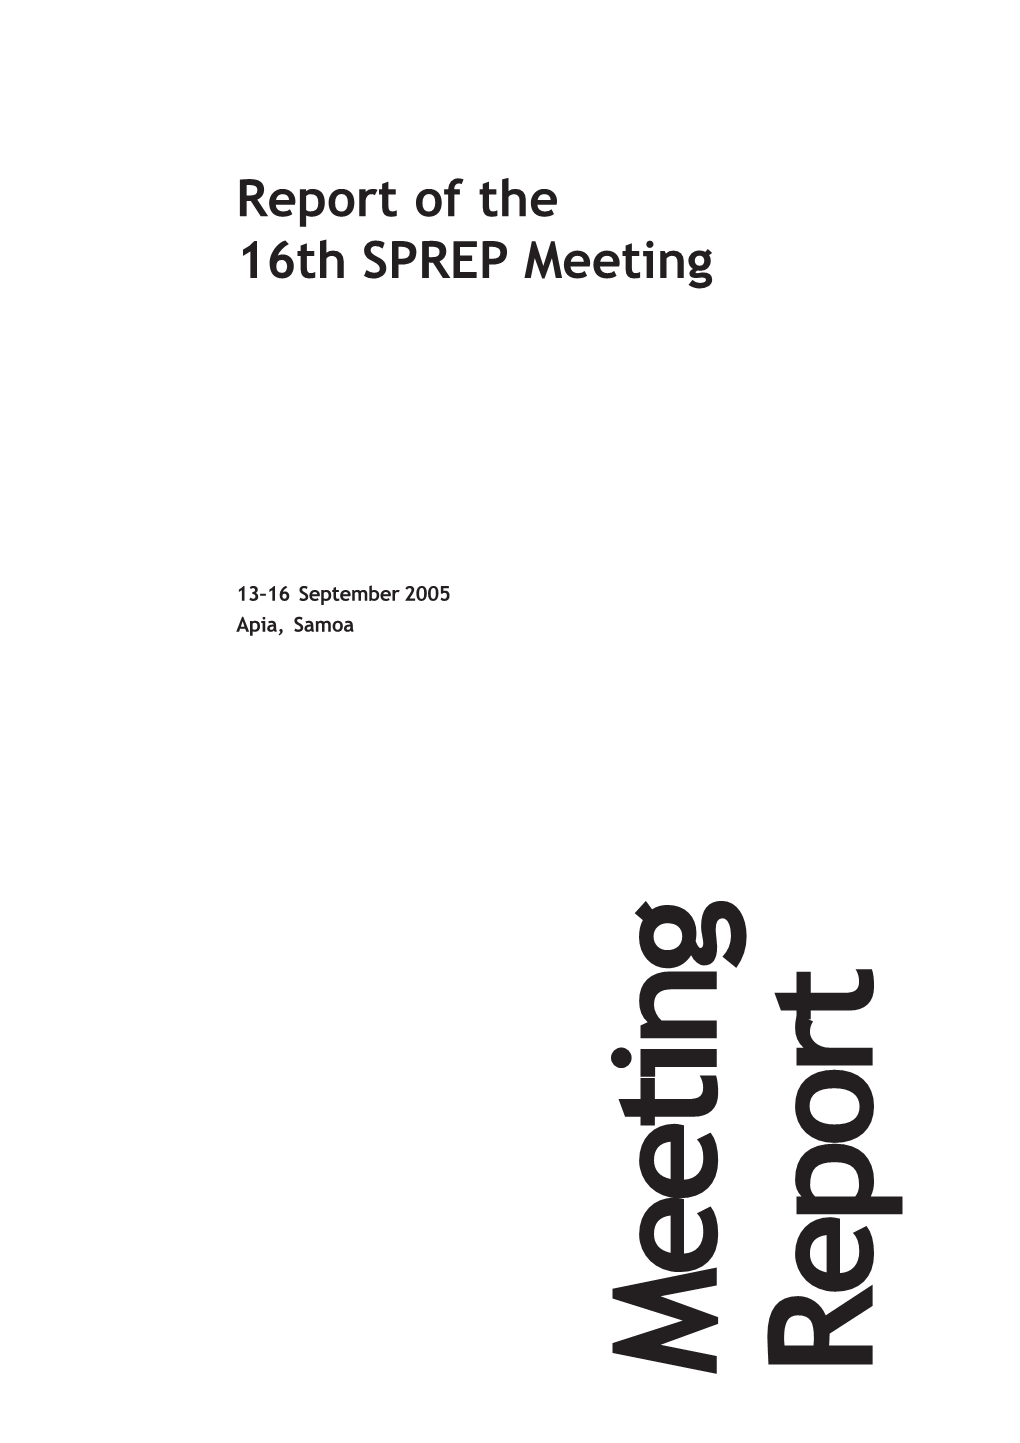 Report of 16Th SPREP Meeting